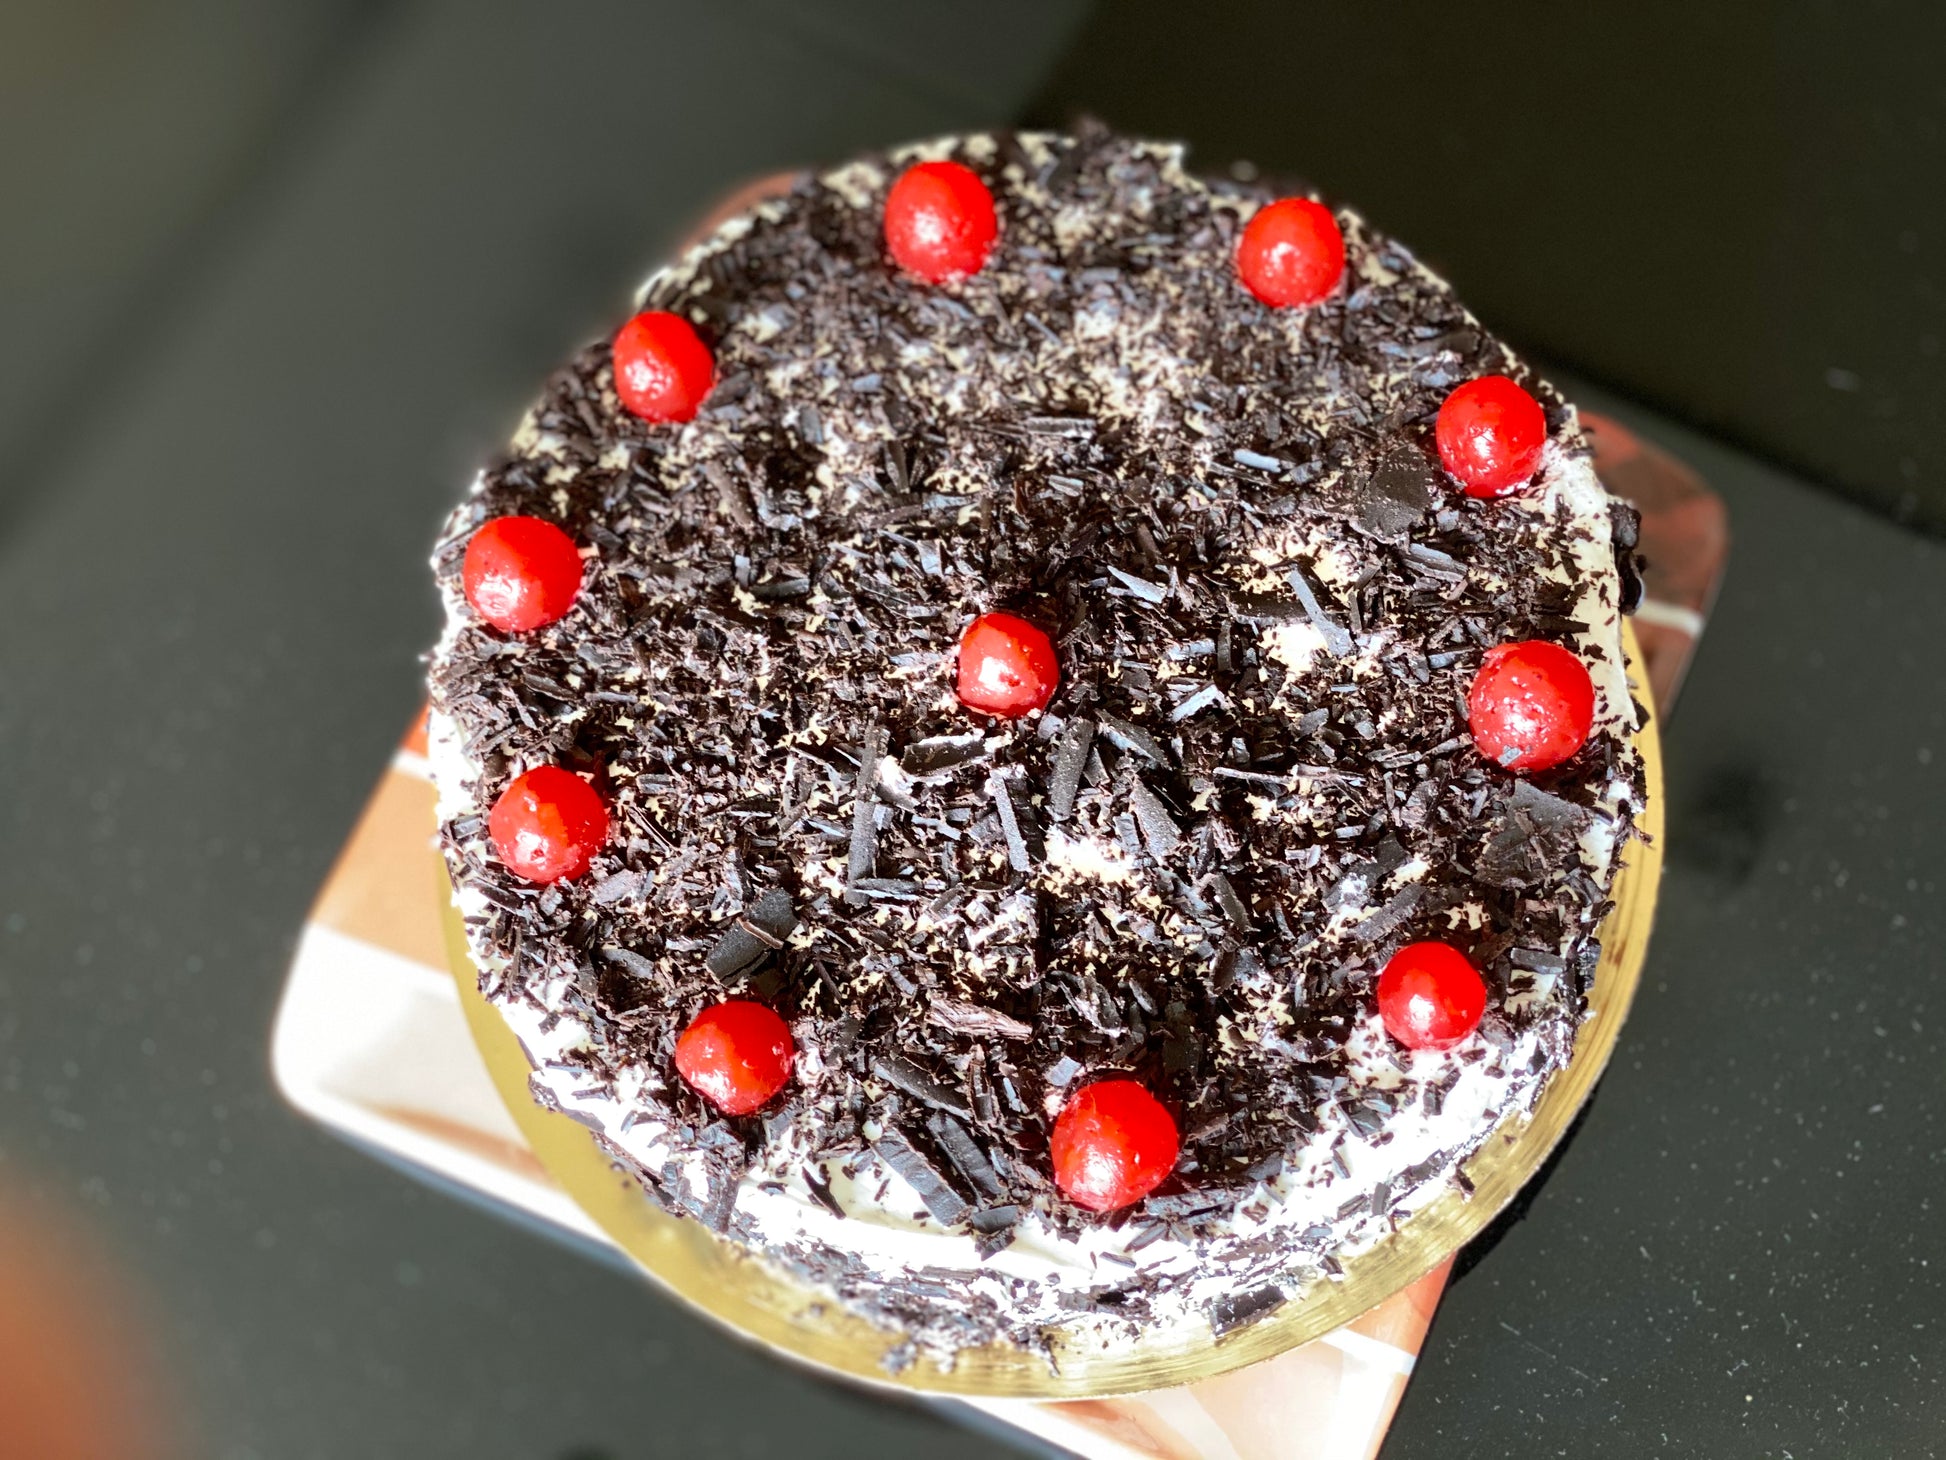 Black forest cake, chocolate cake with cherries